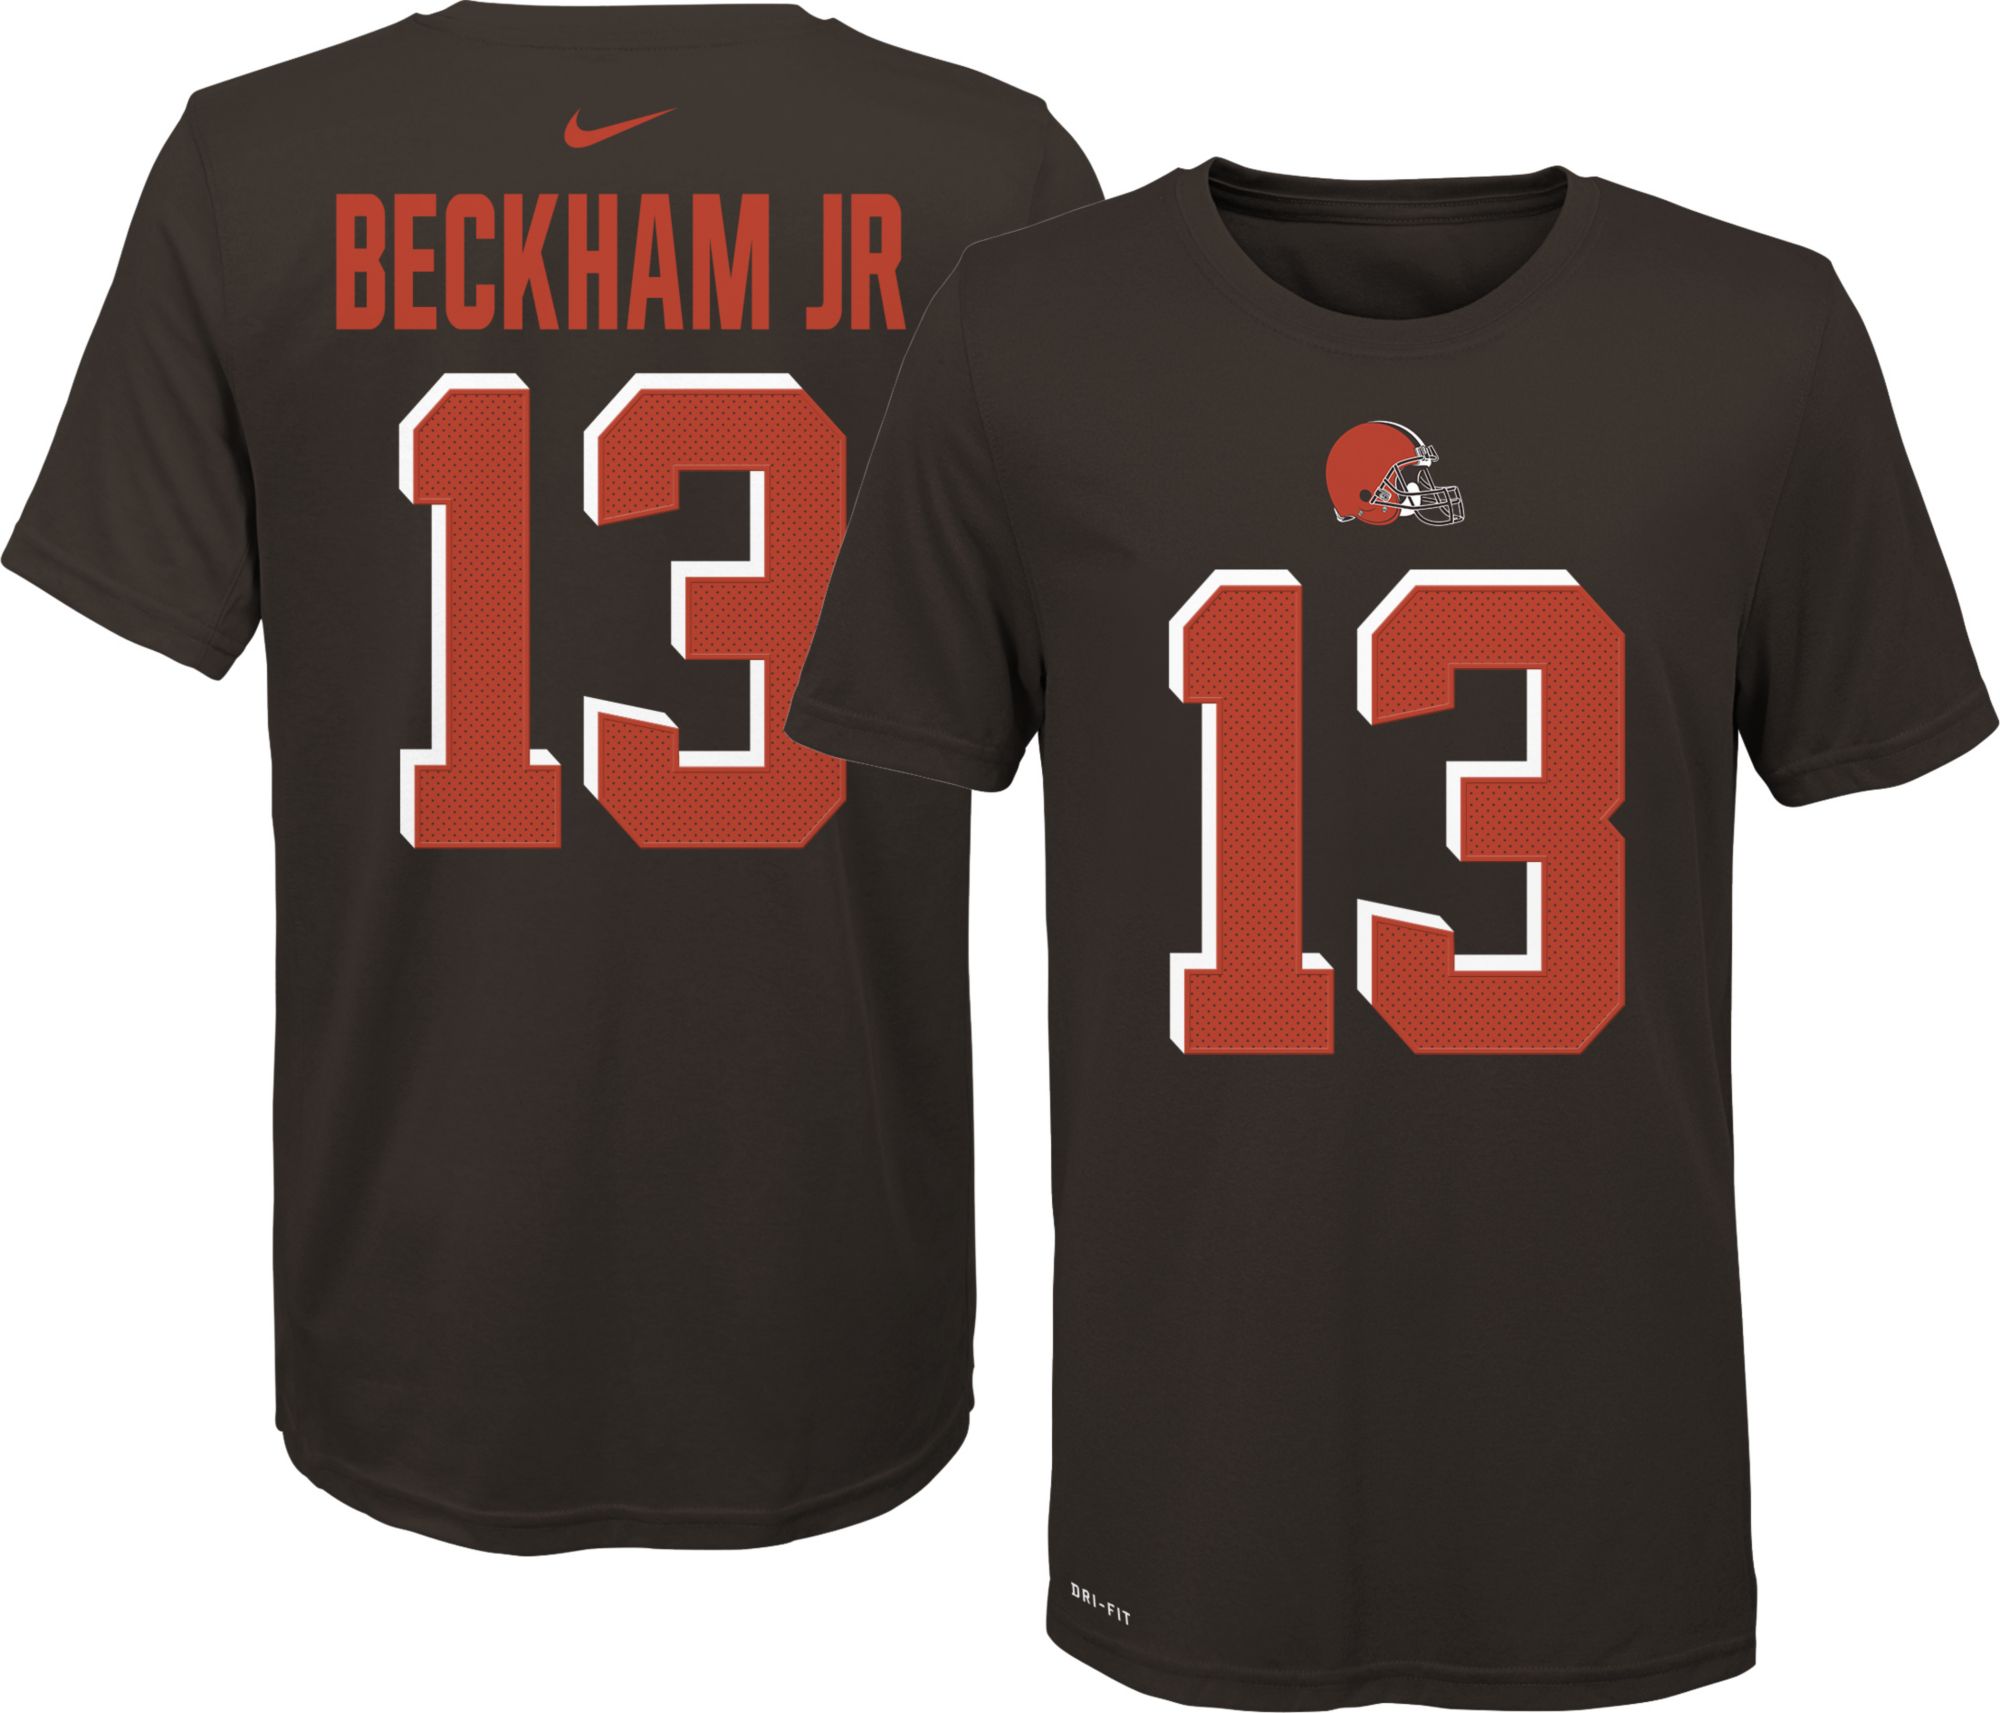 odell jersey youth